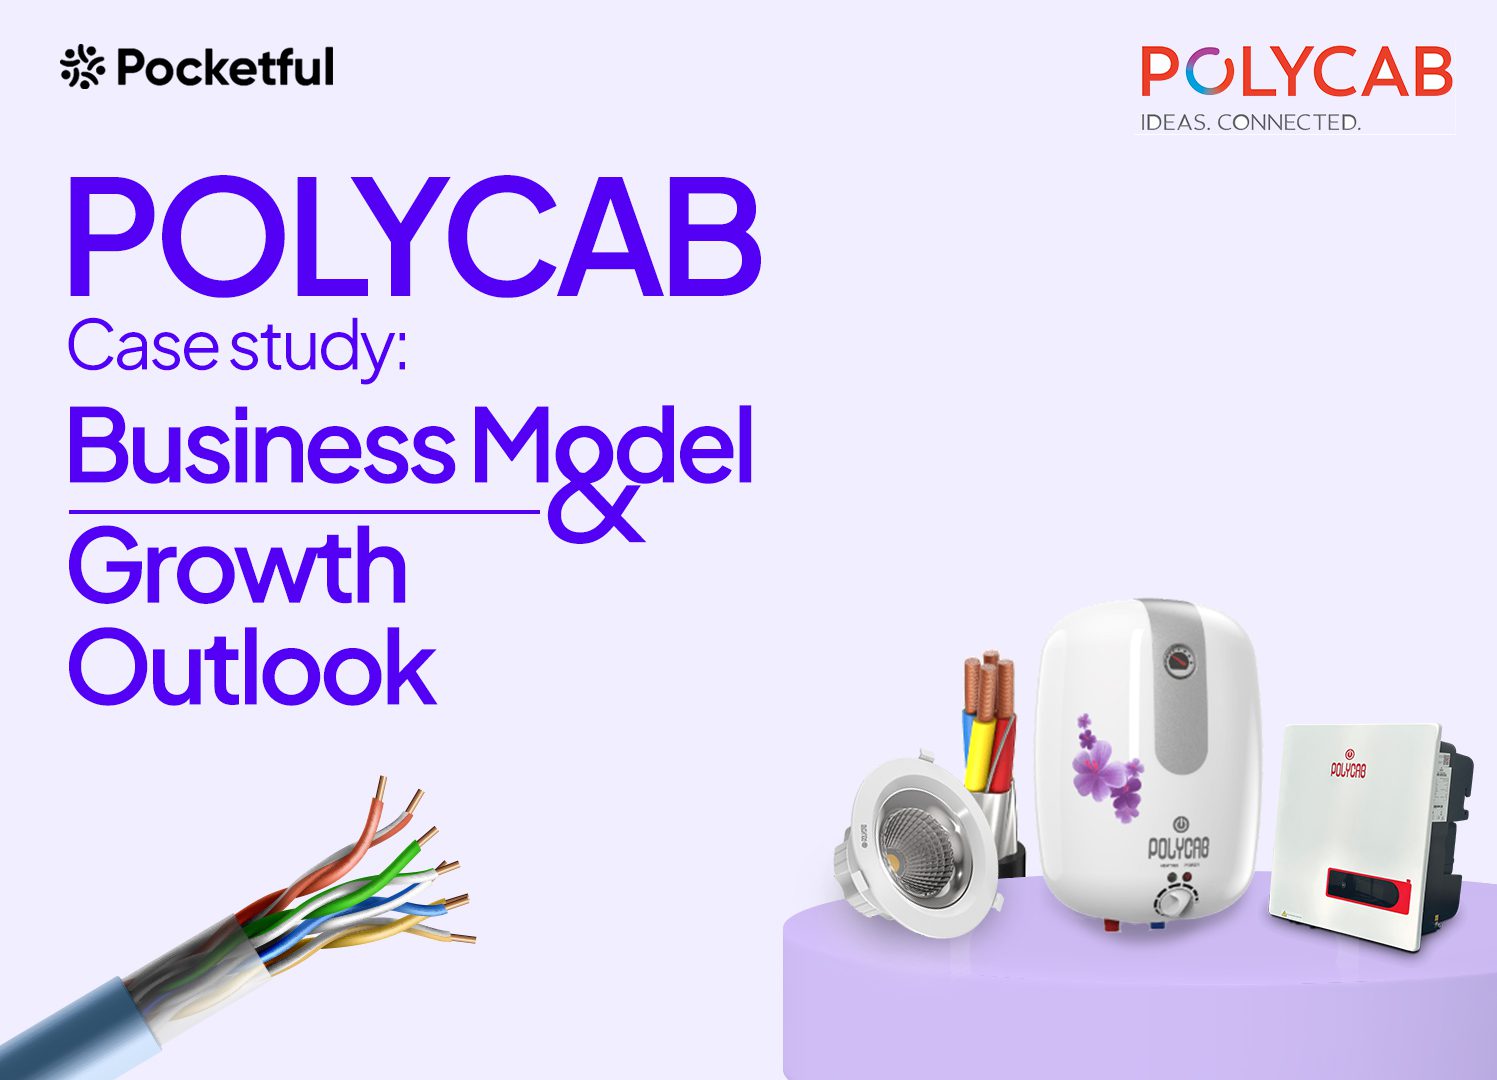 Polycab Case Study: Business Model, Financials, Competitors, and Growth Outlook